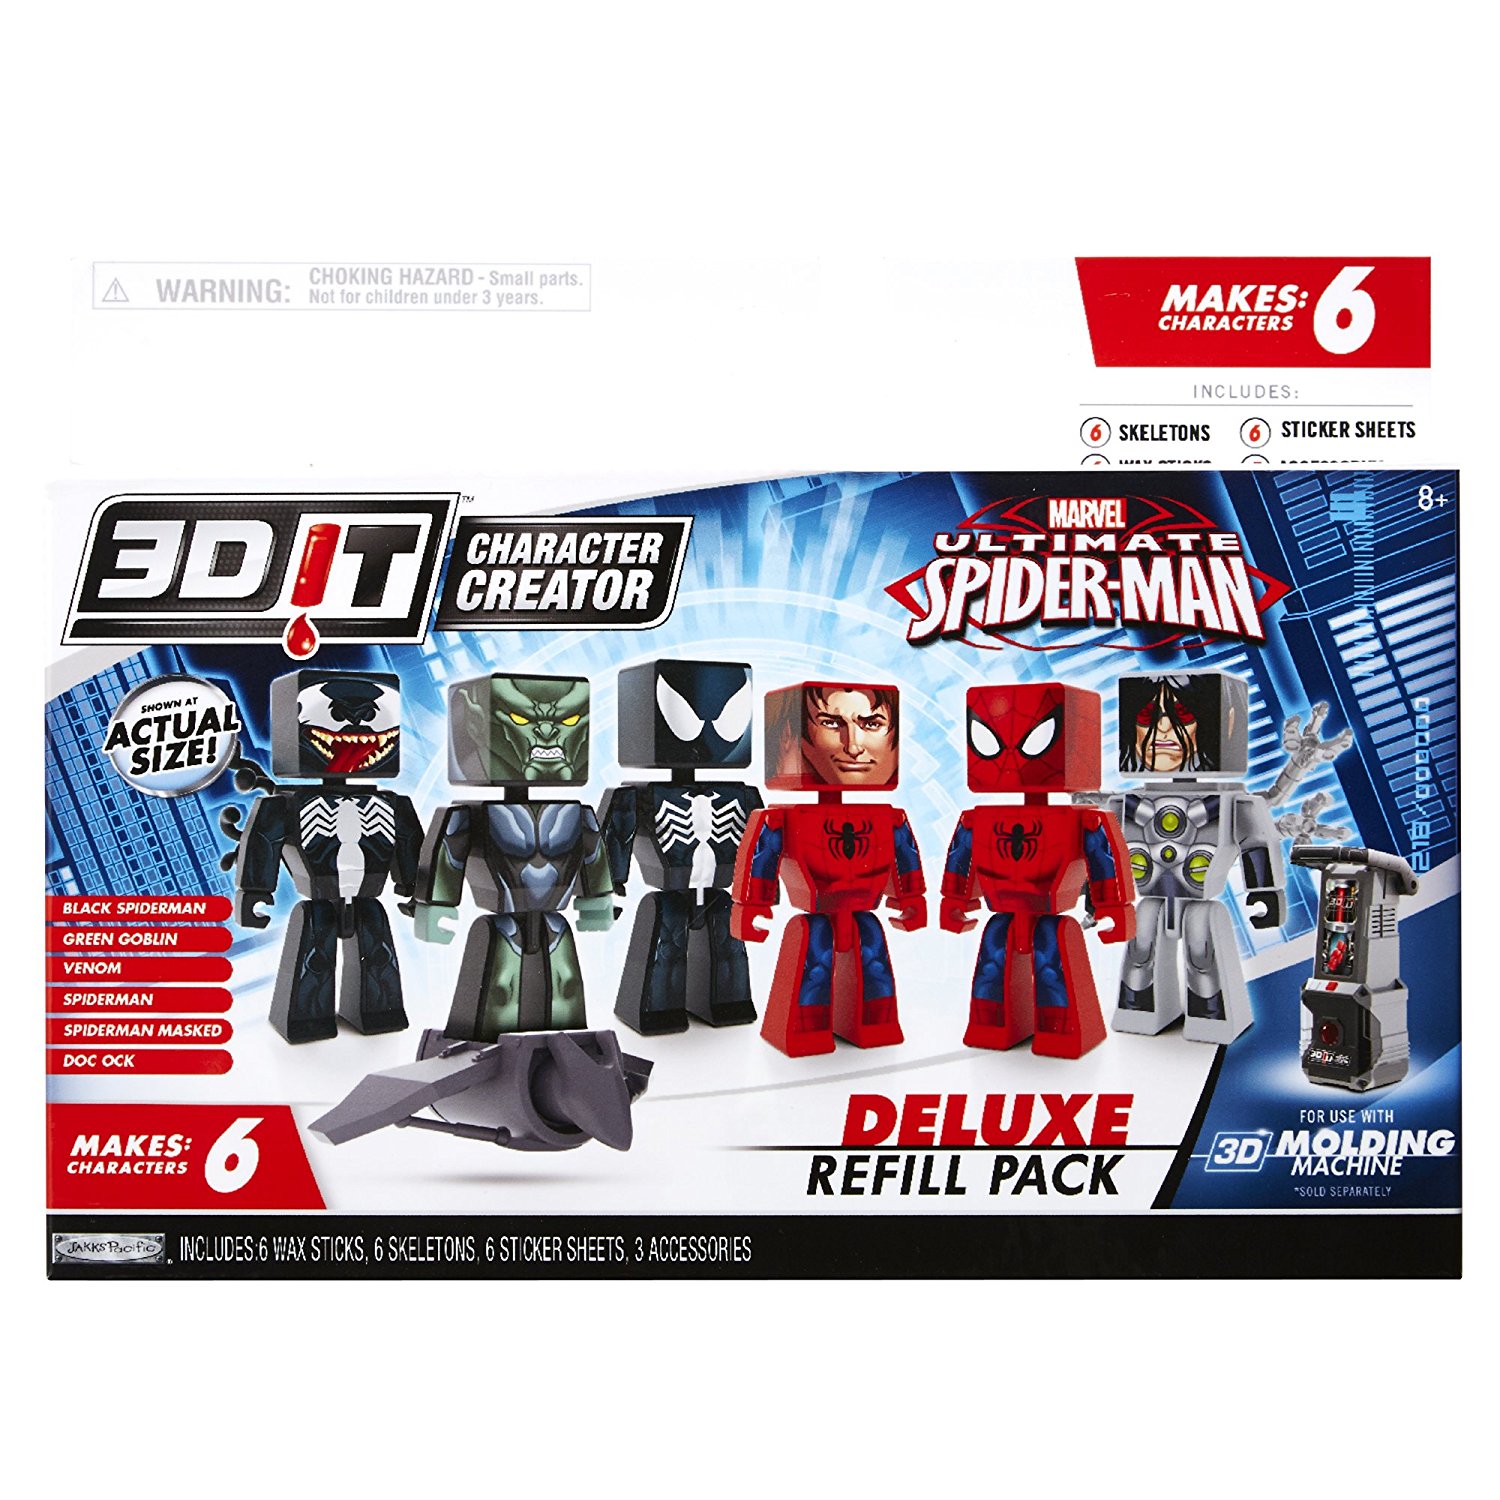 3DIT Character Creator Marvel Ultimate Spider-Man Deluxe Refill